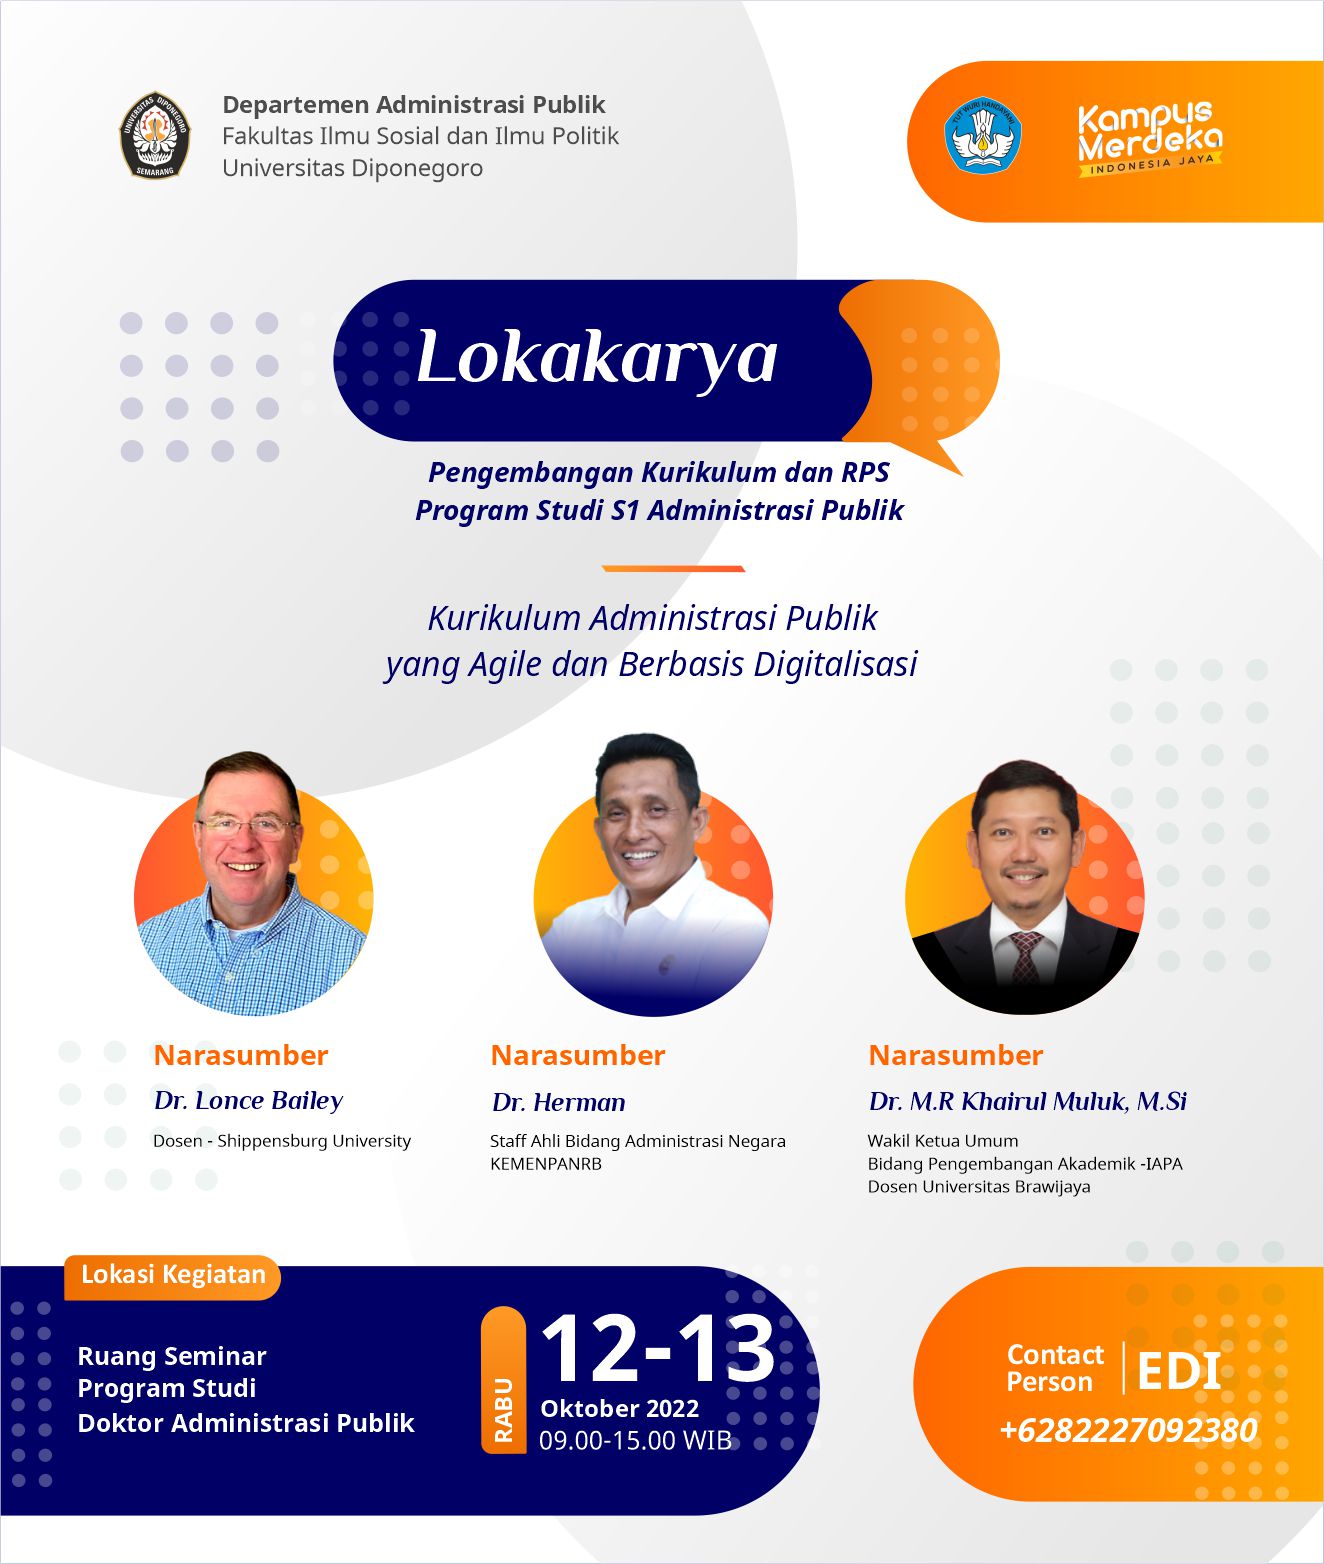 Workshop on Curriculum Development and RPS for Undergraduate Public Administration: Agile and Digitalization-Based Public Administration Curriculum